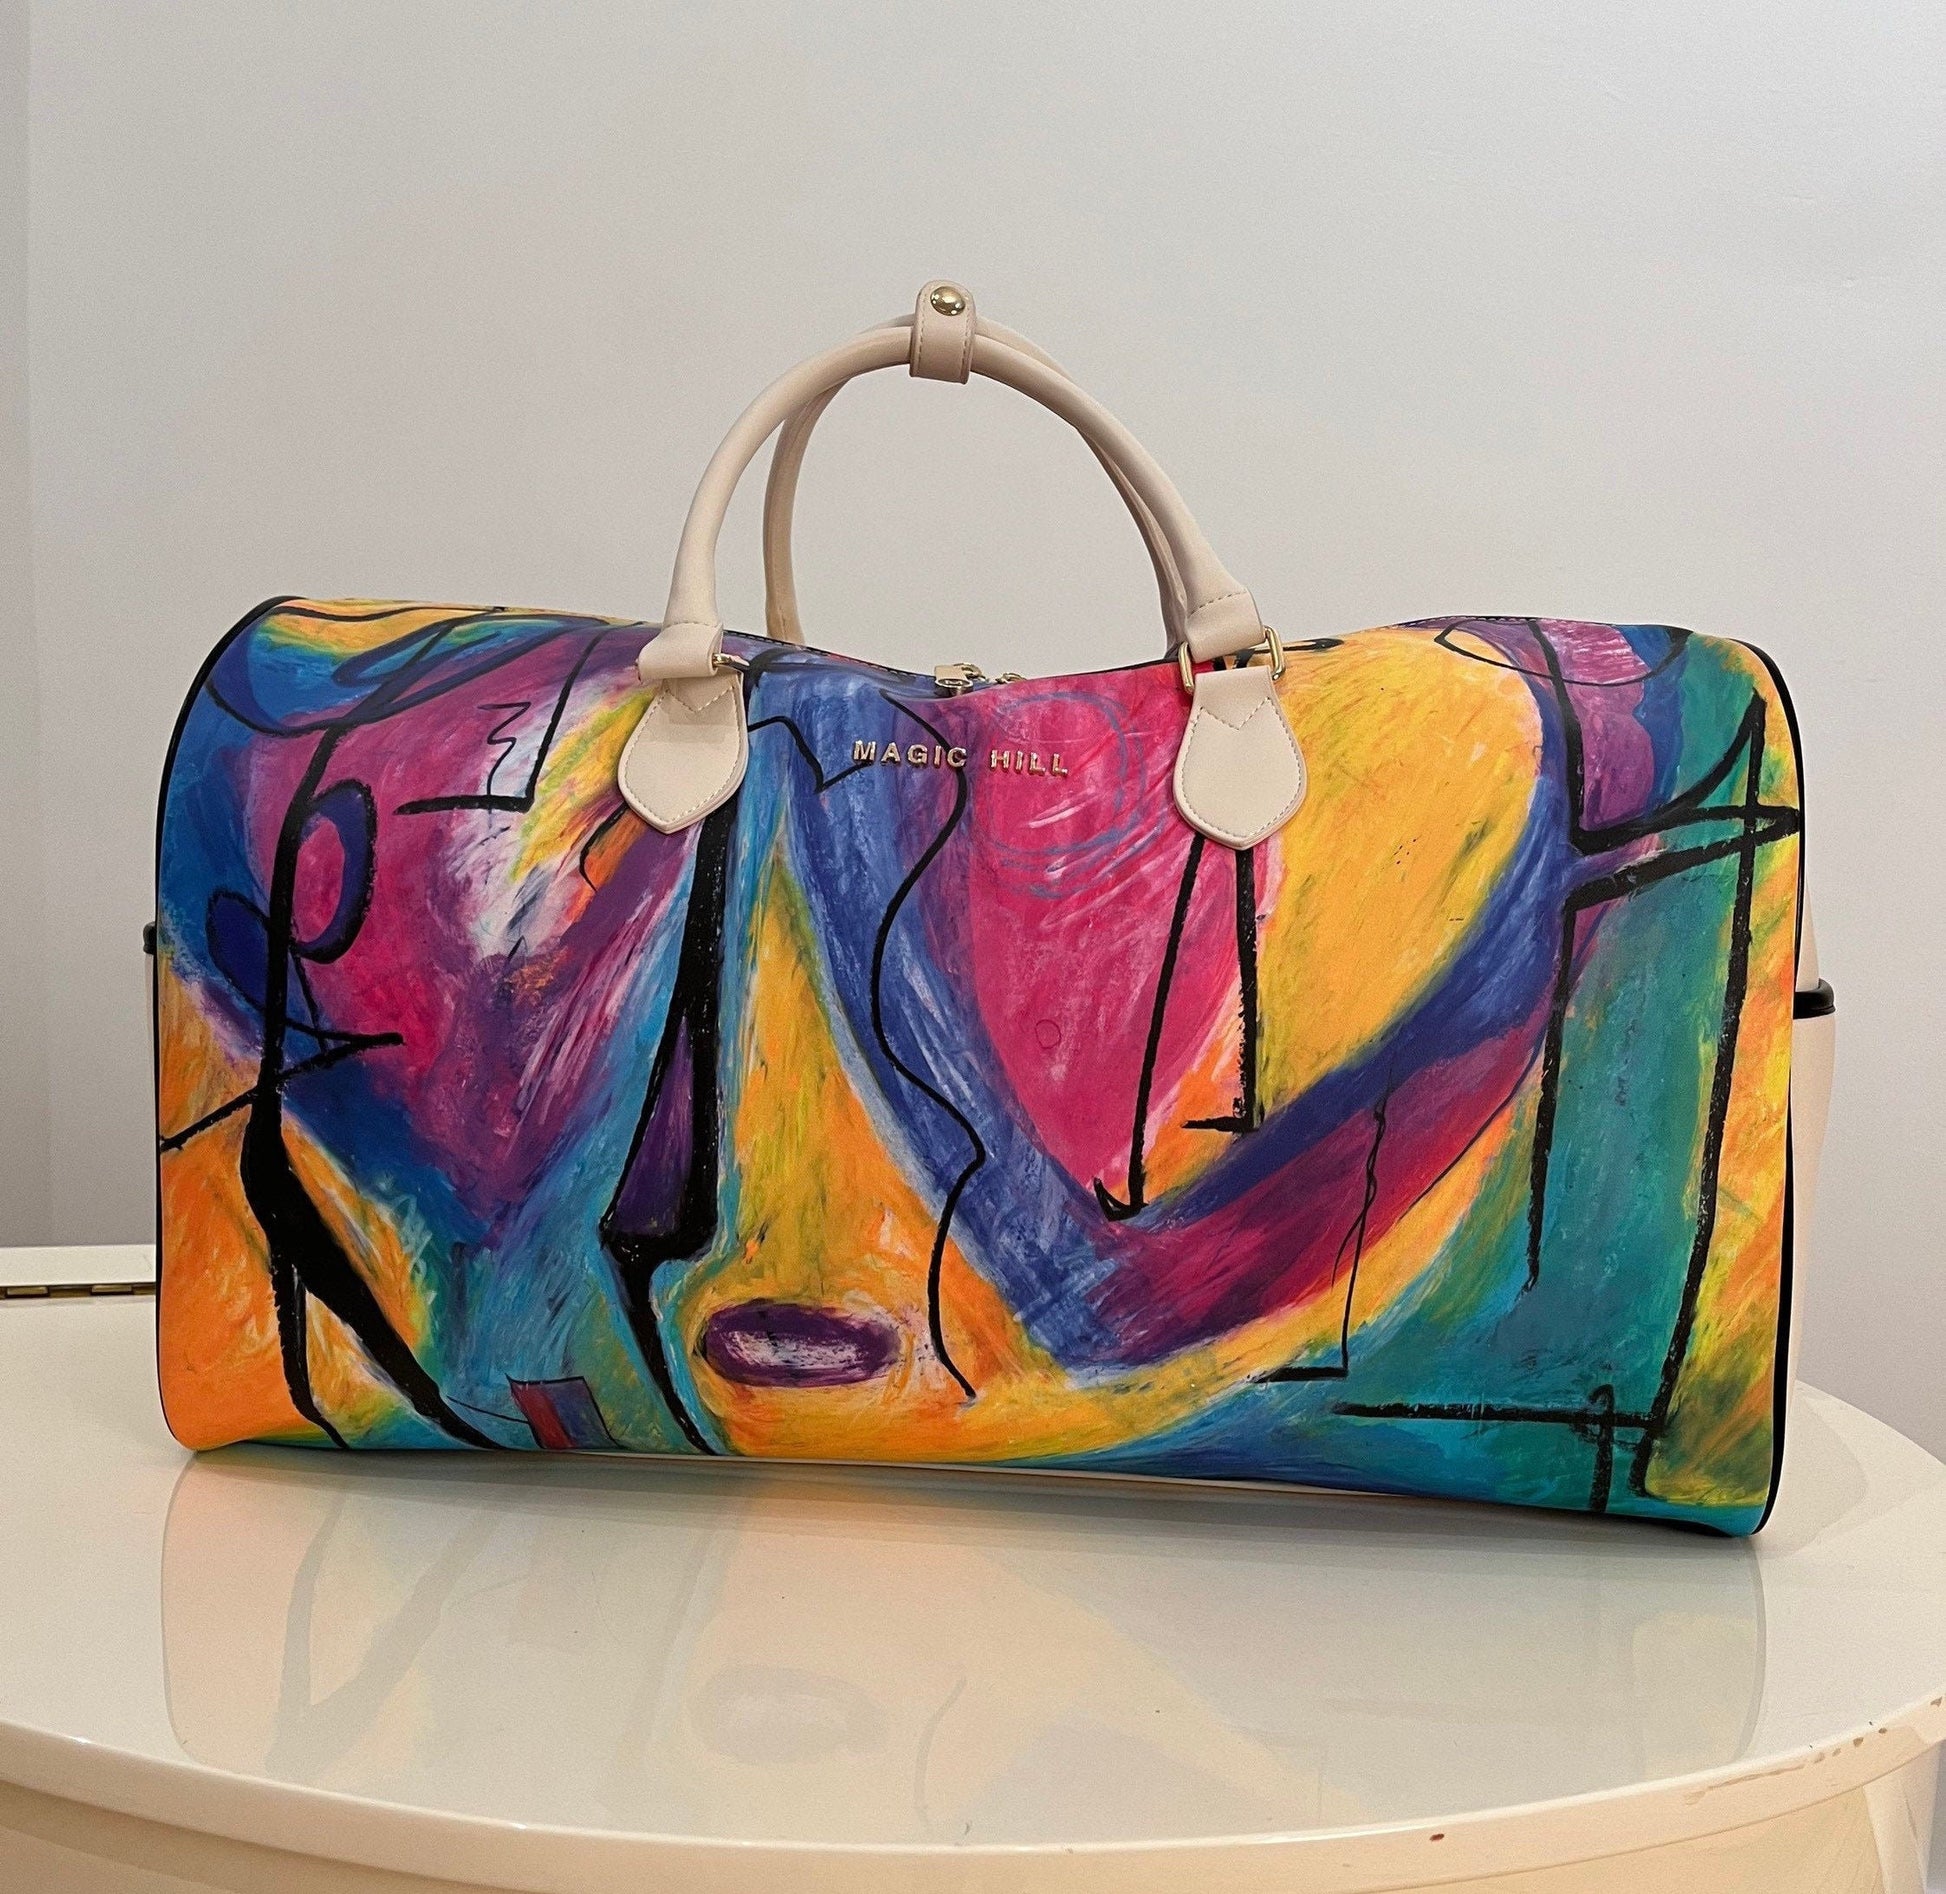 Pre Order “Myra” - Duffle Bag by Bruce Mishell Collection for Magic Hill - Mercantile